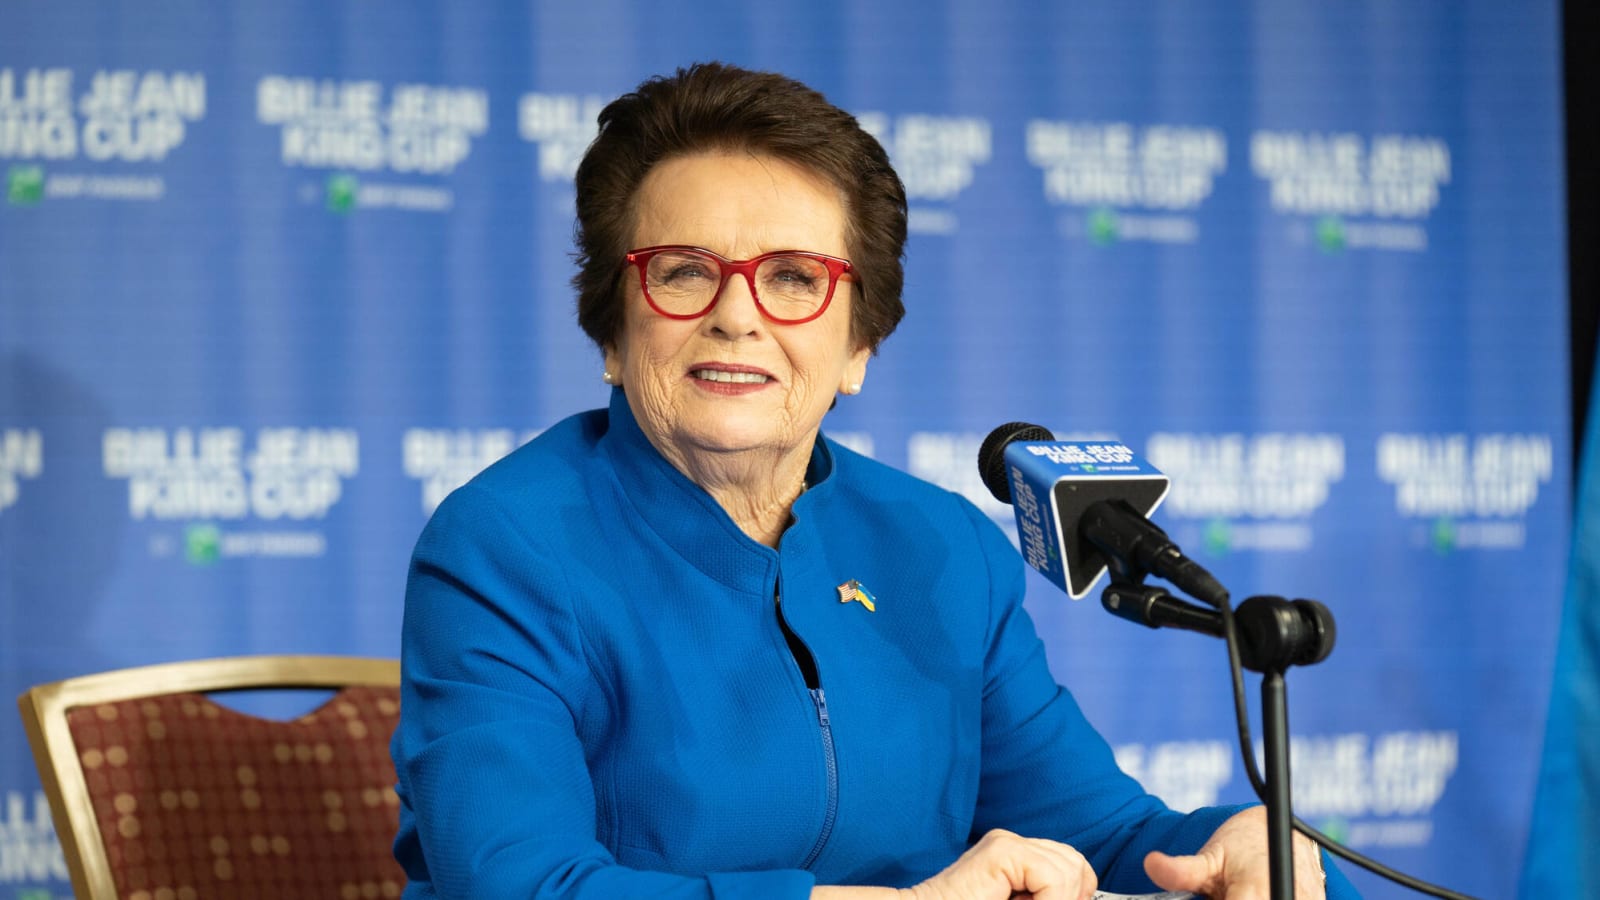 Billie Jean King Continuing Fight for Pay Equity 50 Years After US Open Stand